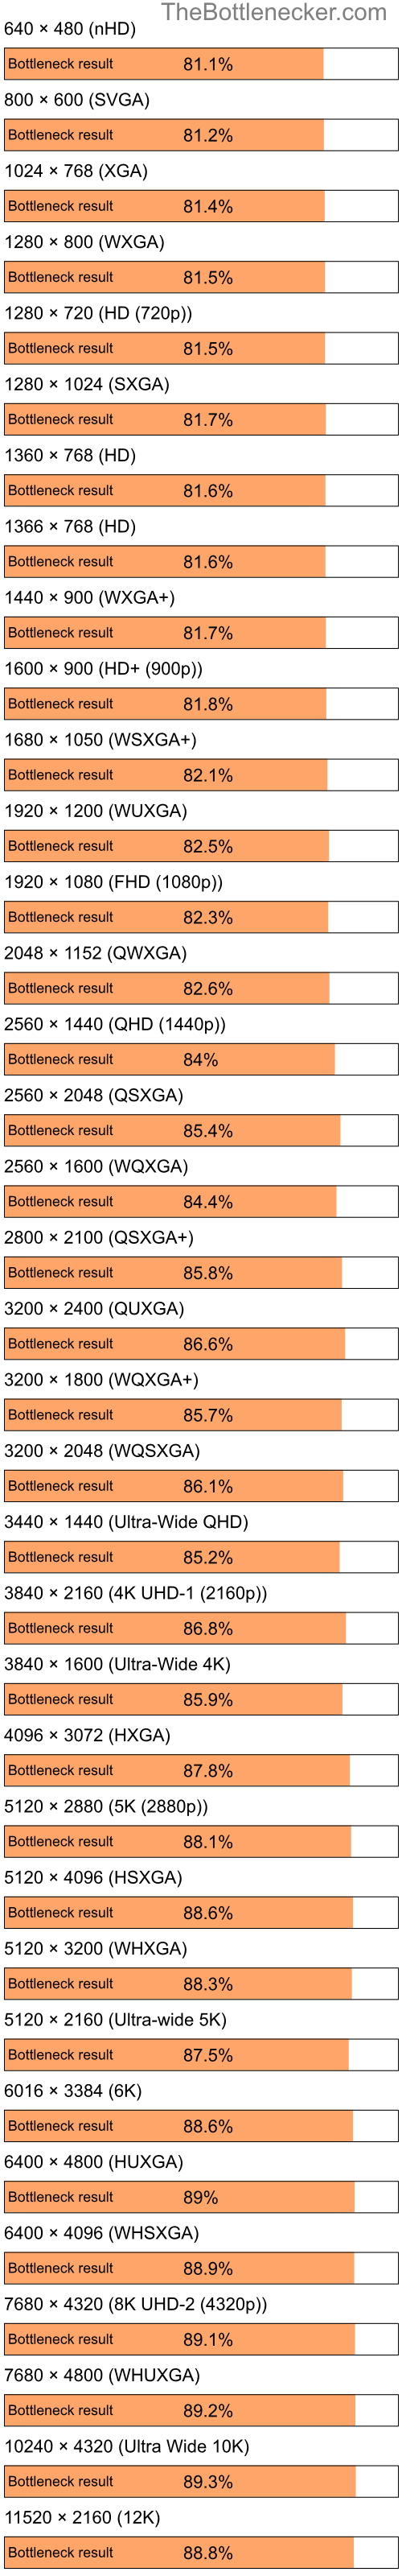 Bottleneck results by resolution for Intel Atom Z520 and NVIDIA GeForce 7100 in Graphic Card Intense Tasks